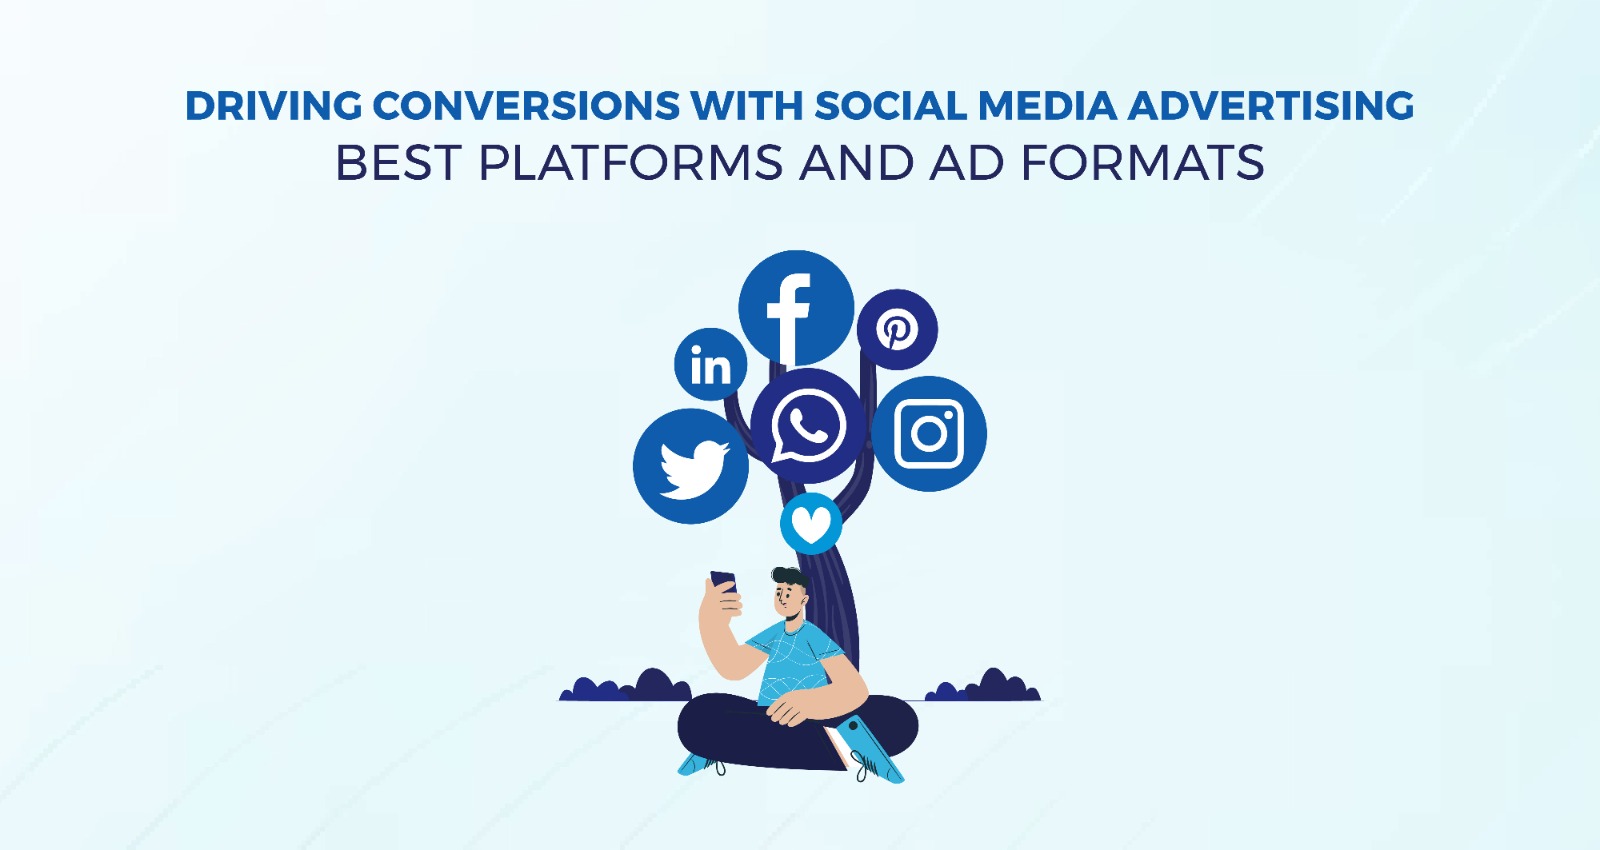 Driving-Conversions-with-Social-Media-Advertising-Best-Platforms-and-Ad-Formats-3.jpeg